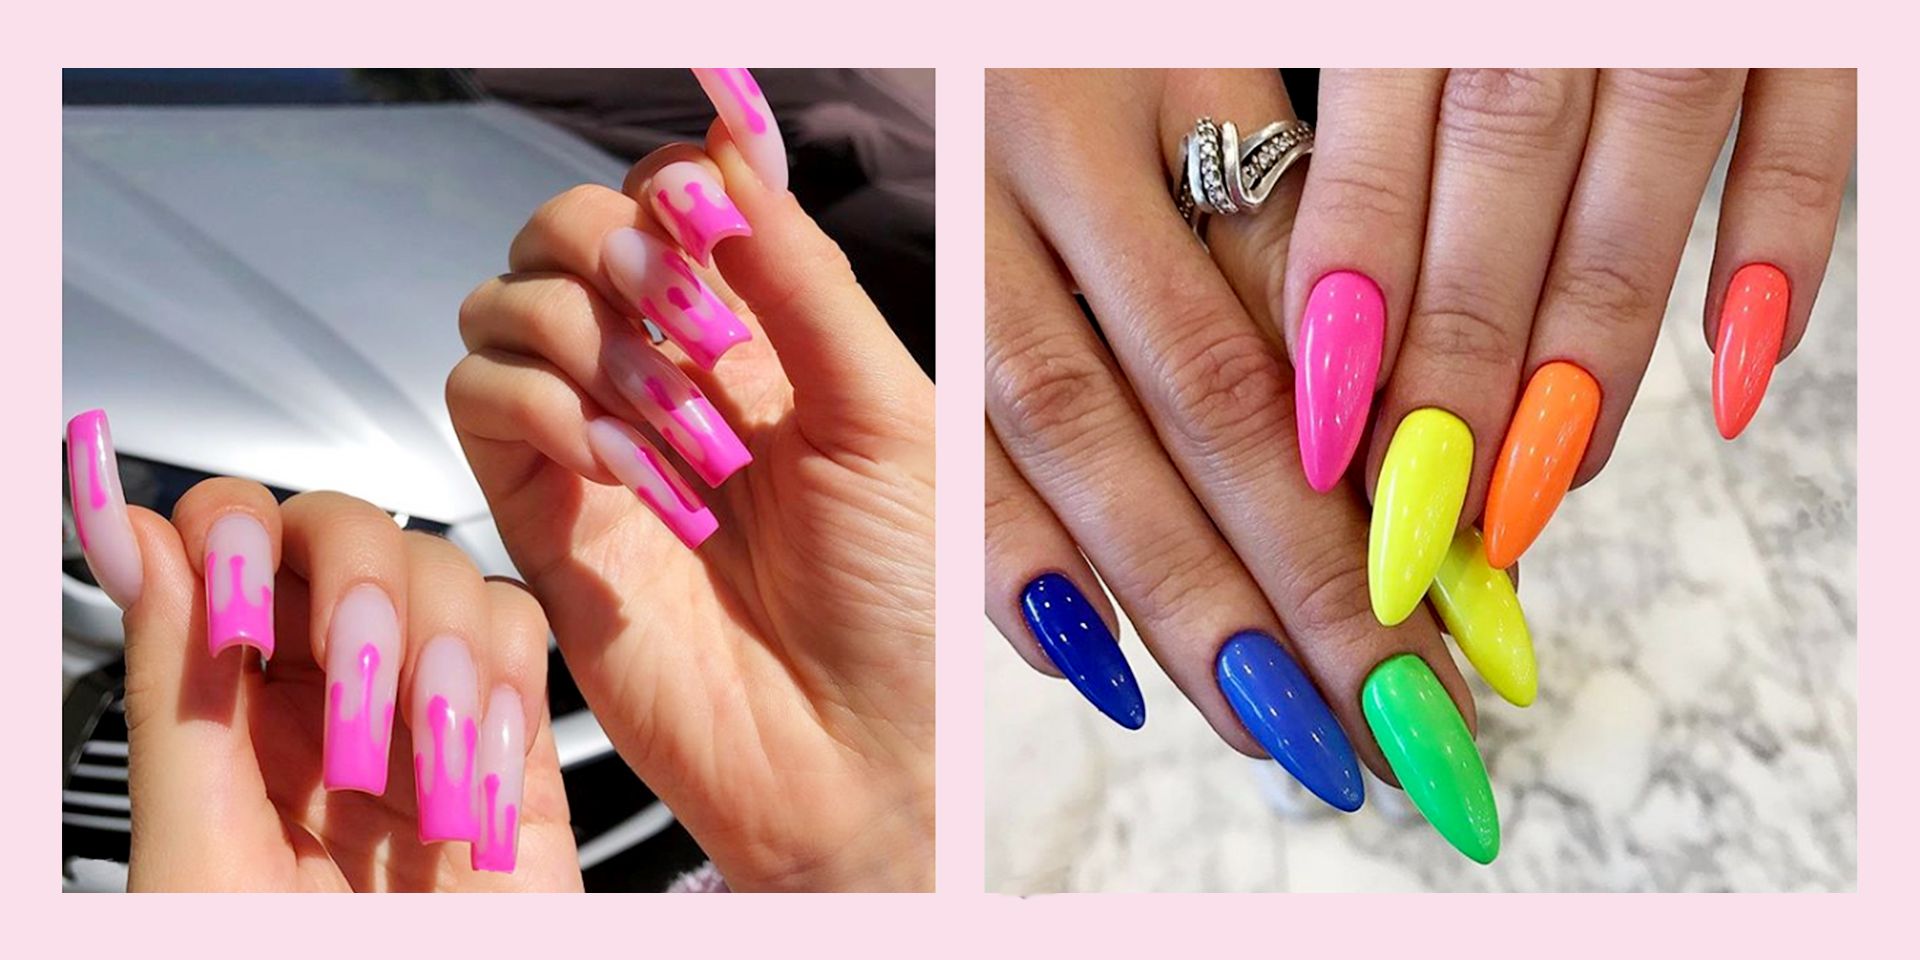 Gel Nails - Everything To About Gel Manicures